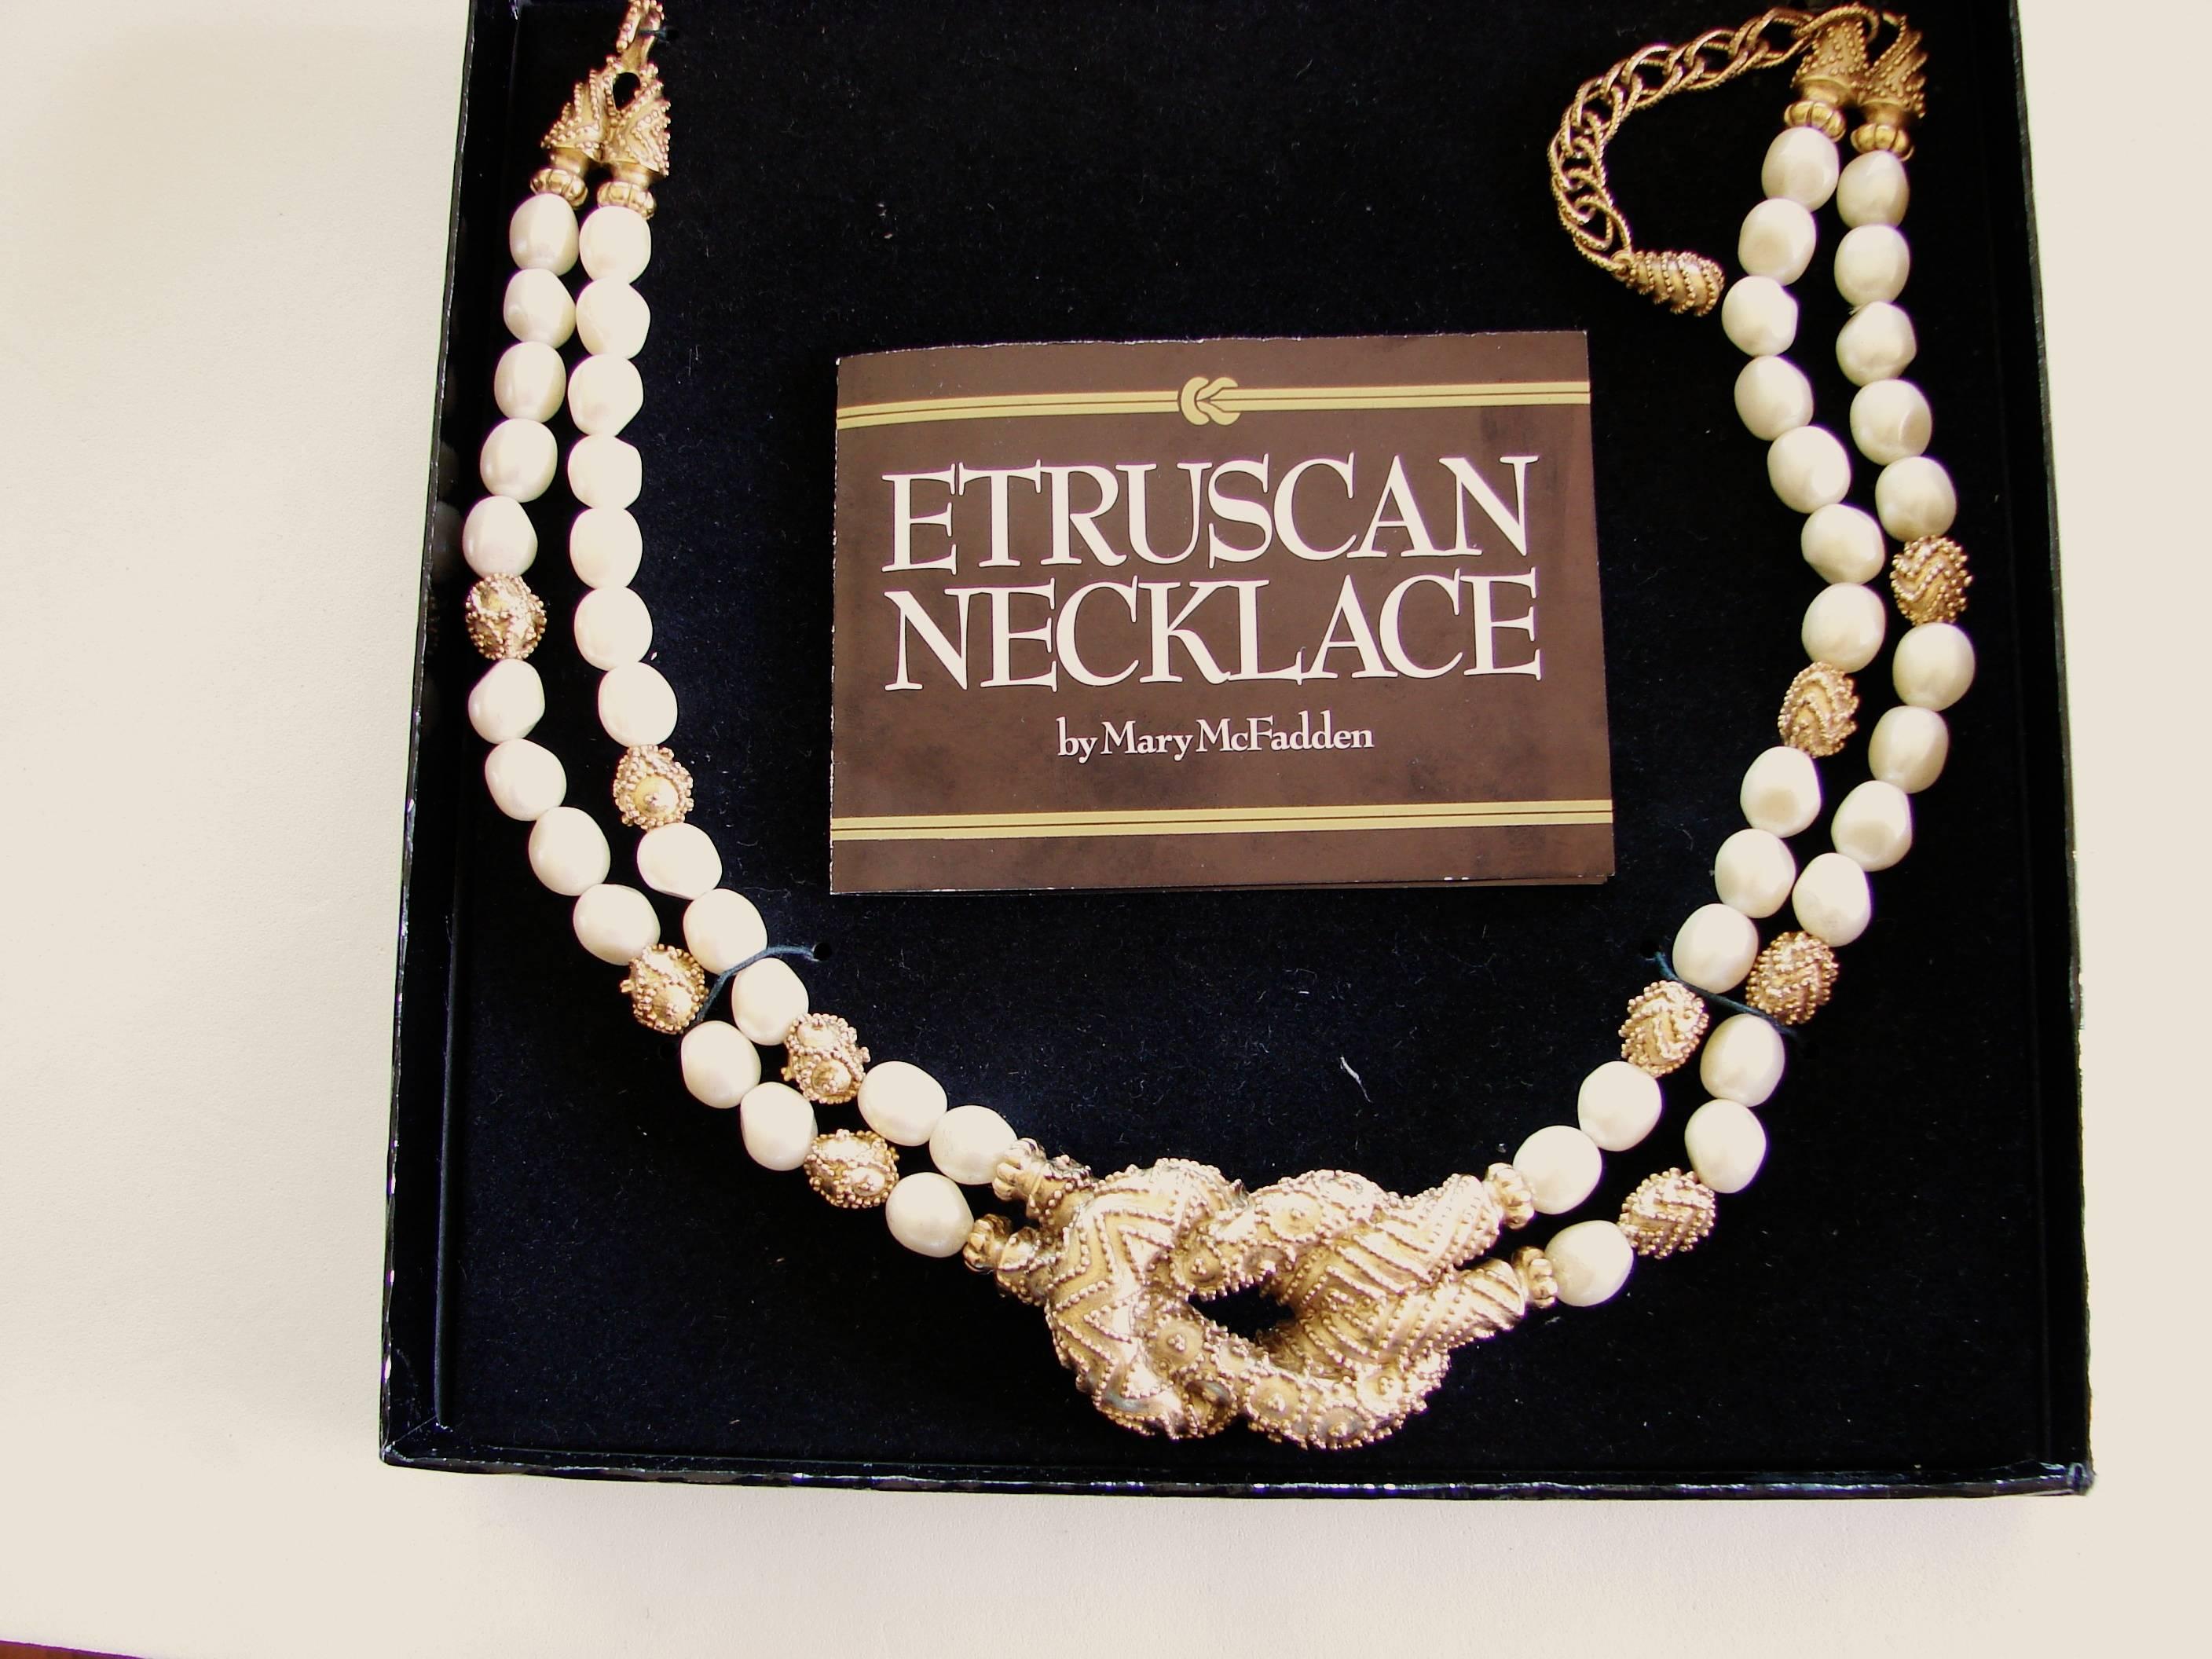 Etruscan Revival Mary McFadden Etruscan Necklace Faux Pearl Double Strand + Gold Beads + Box 80s